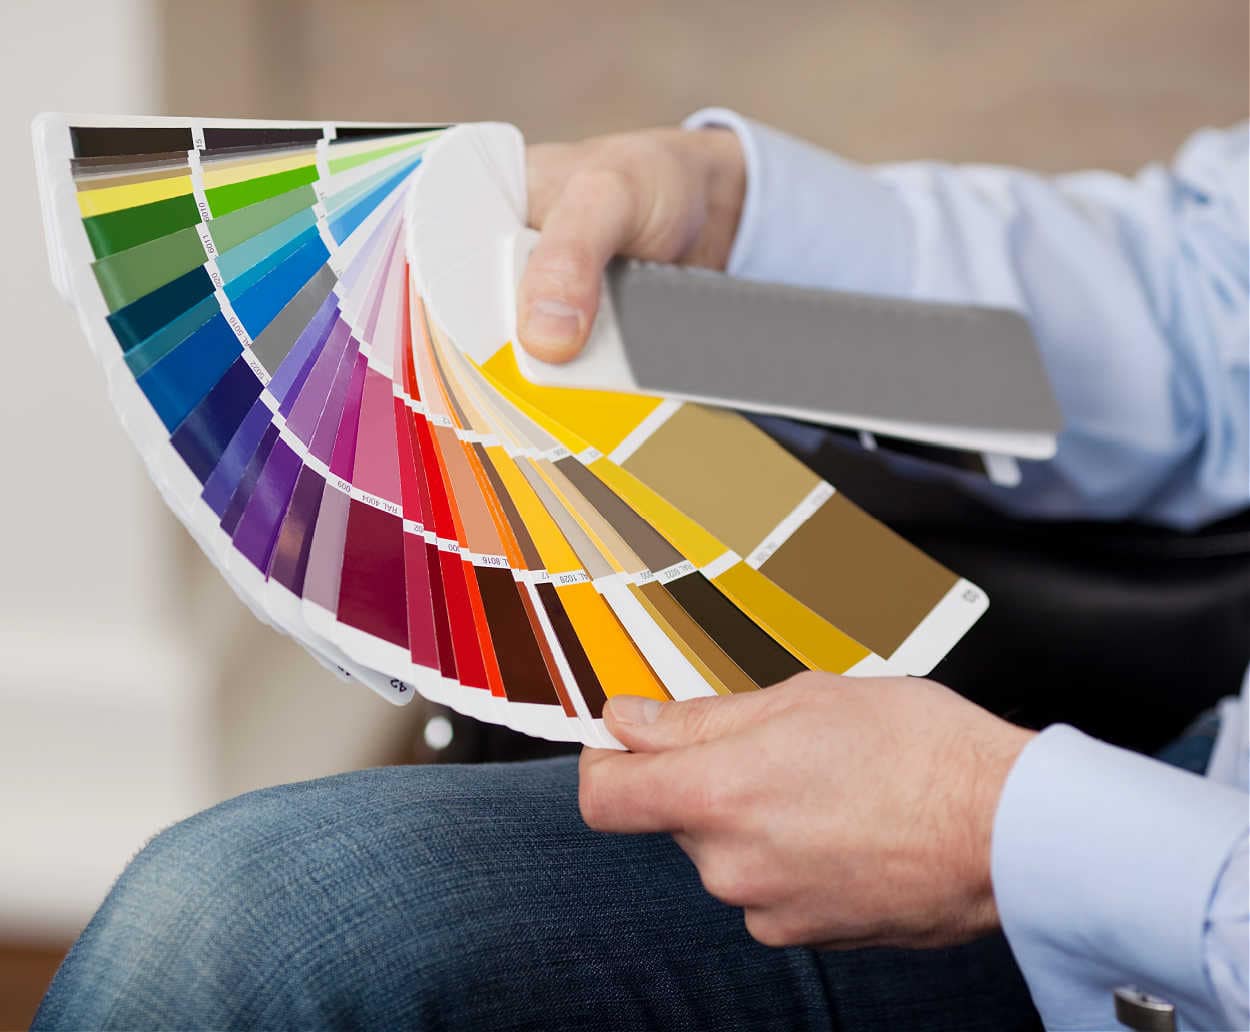 How To Select a Color Scheme for Your Home’s Interior